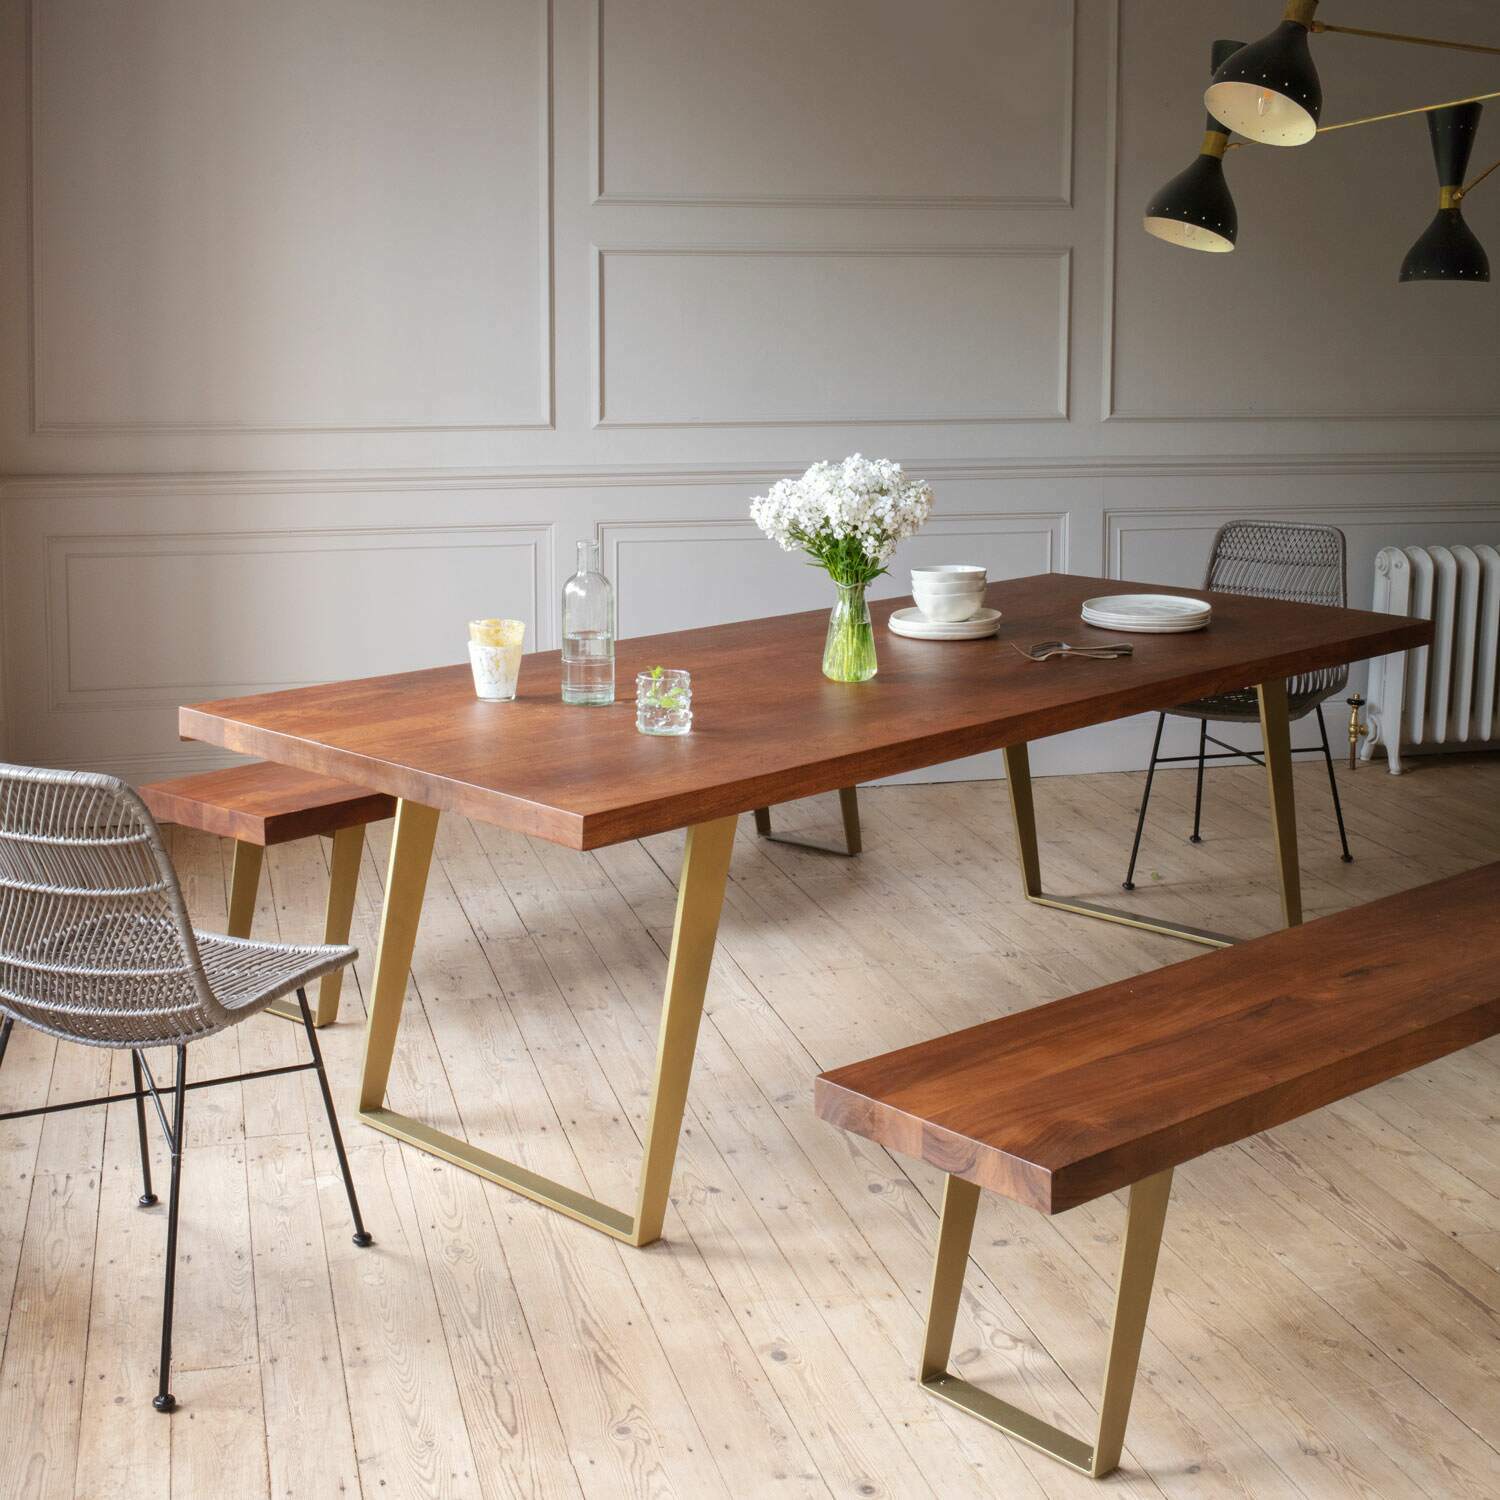 Read more about Graham and green max brass eight seater dining table